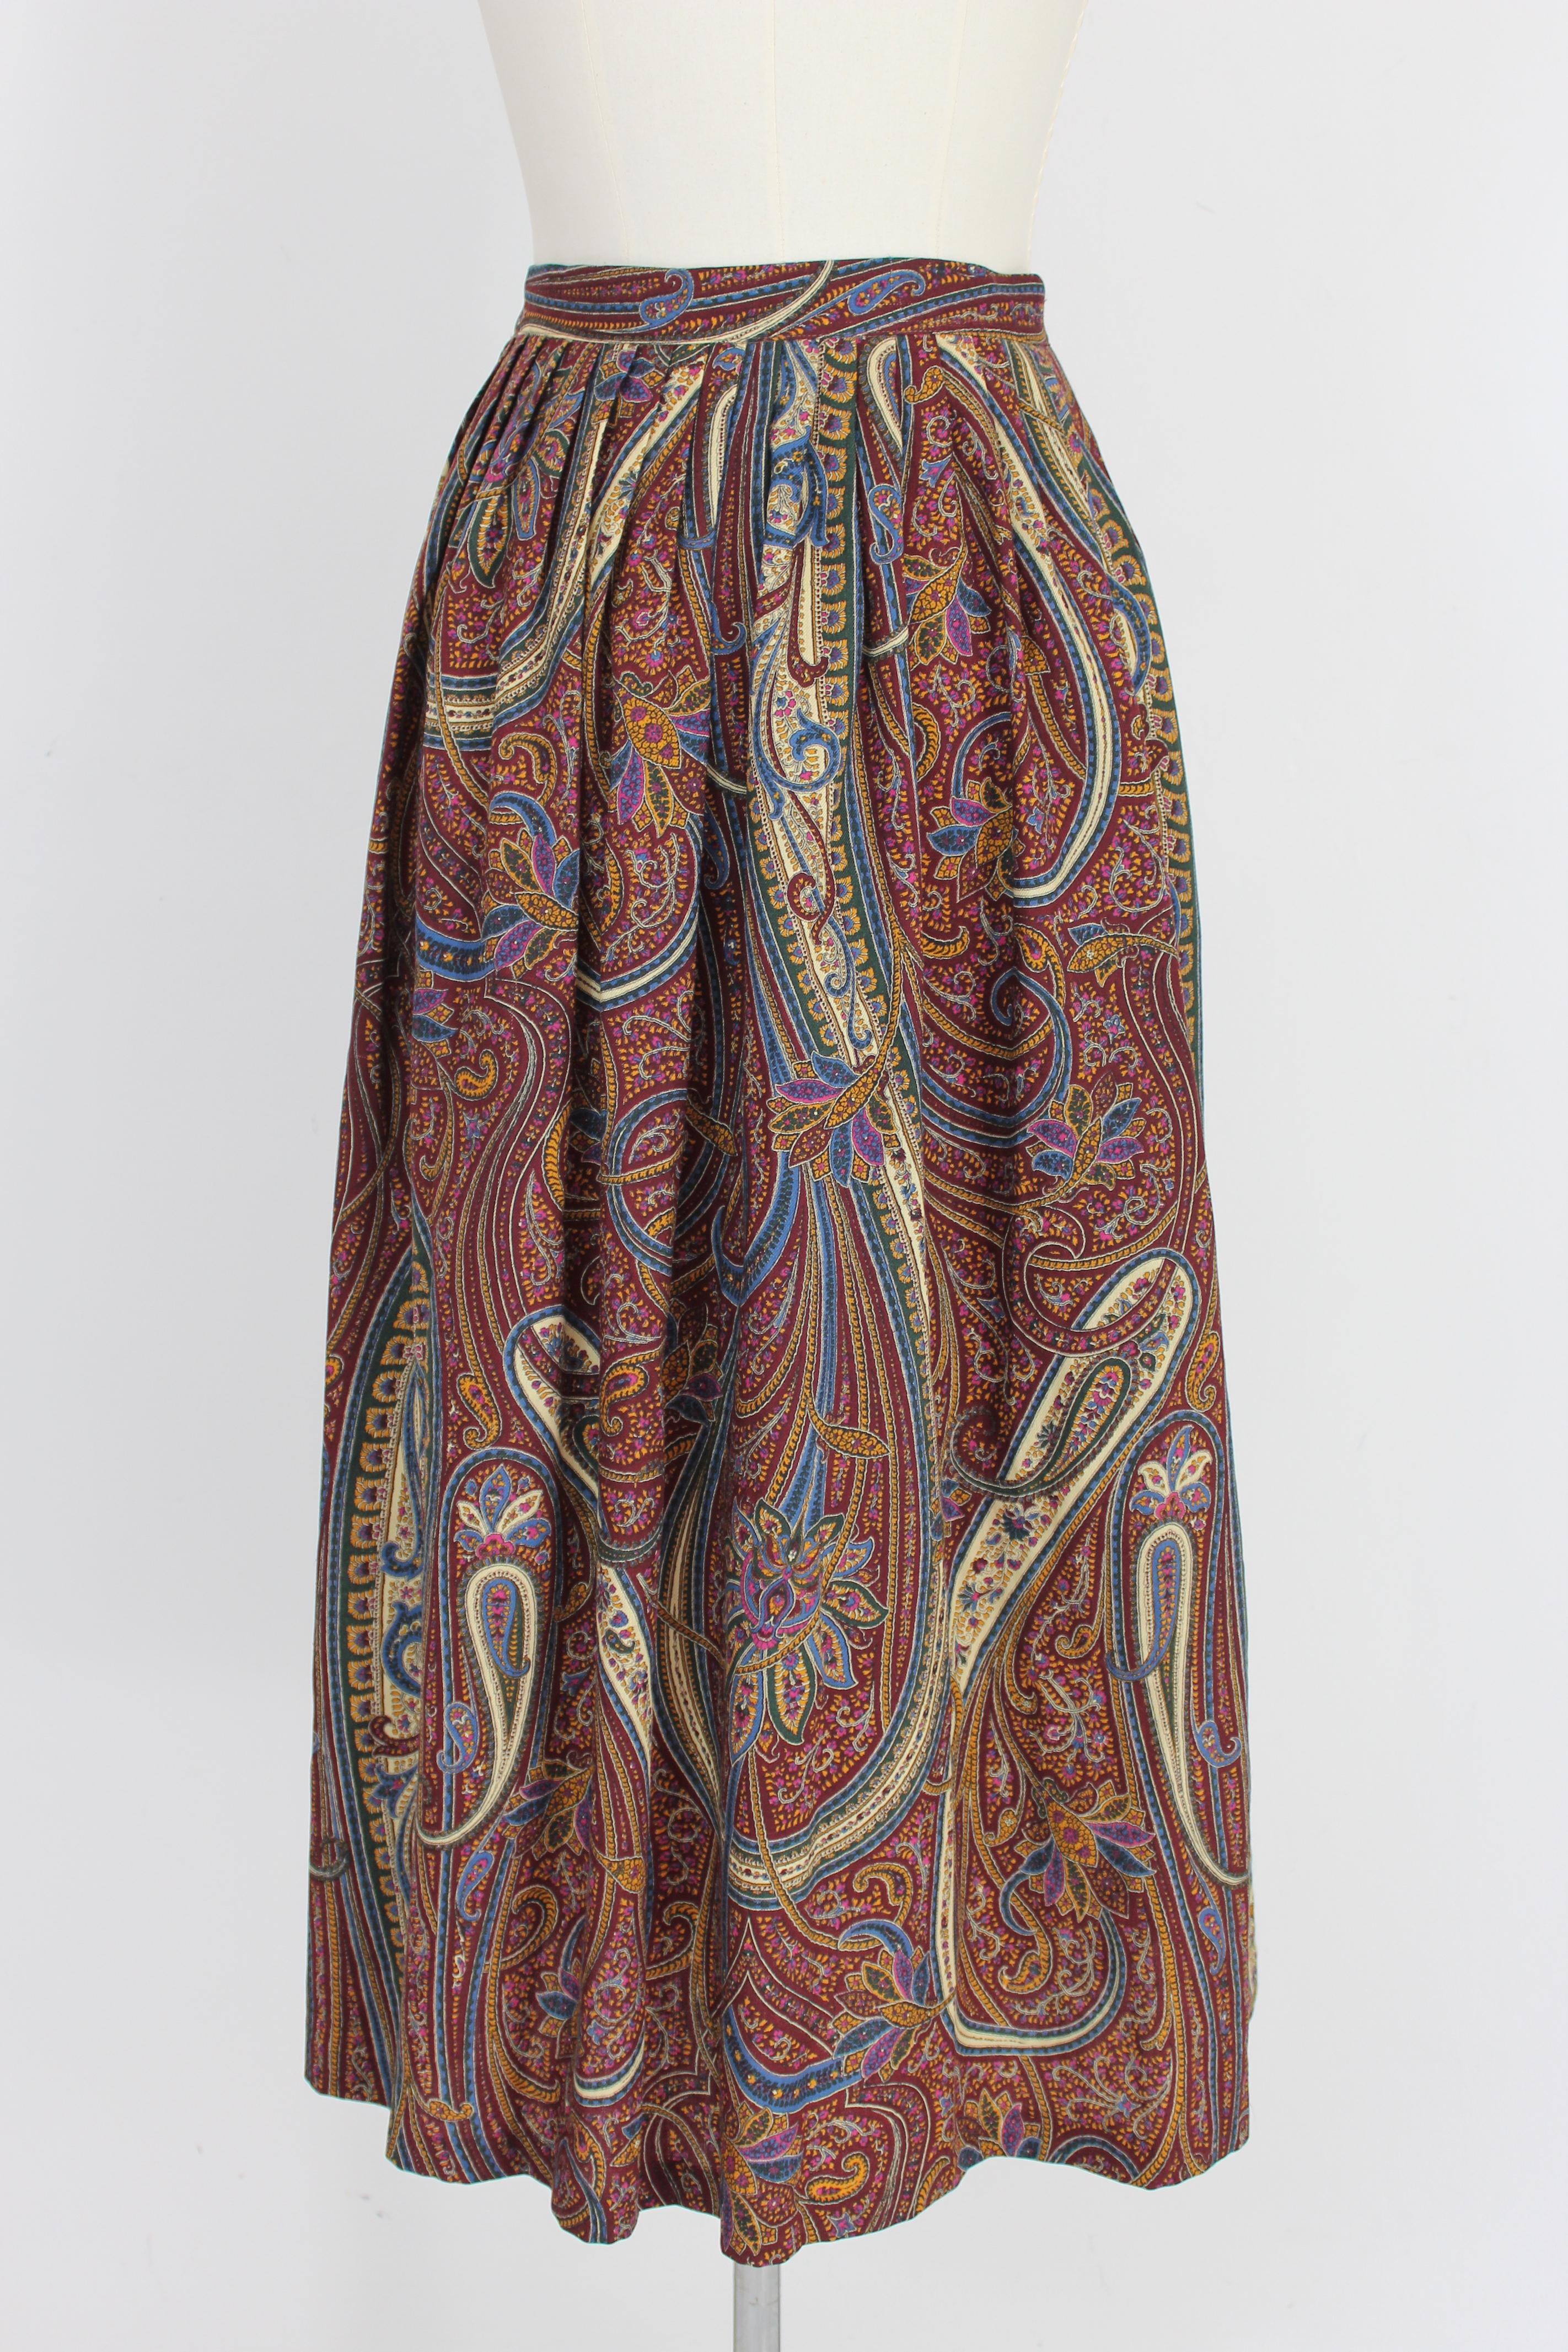 Ralph Lauren 90s vintage skirt. Long maxi skirt, brown and beige with paisley designs. Double button closure at the waist, two pockets on the sides. 100% wool fabric. Made in Itay.

Condition: Excellent

This item has been used a few times but